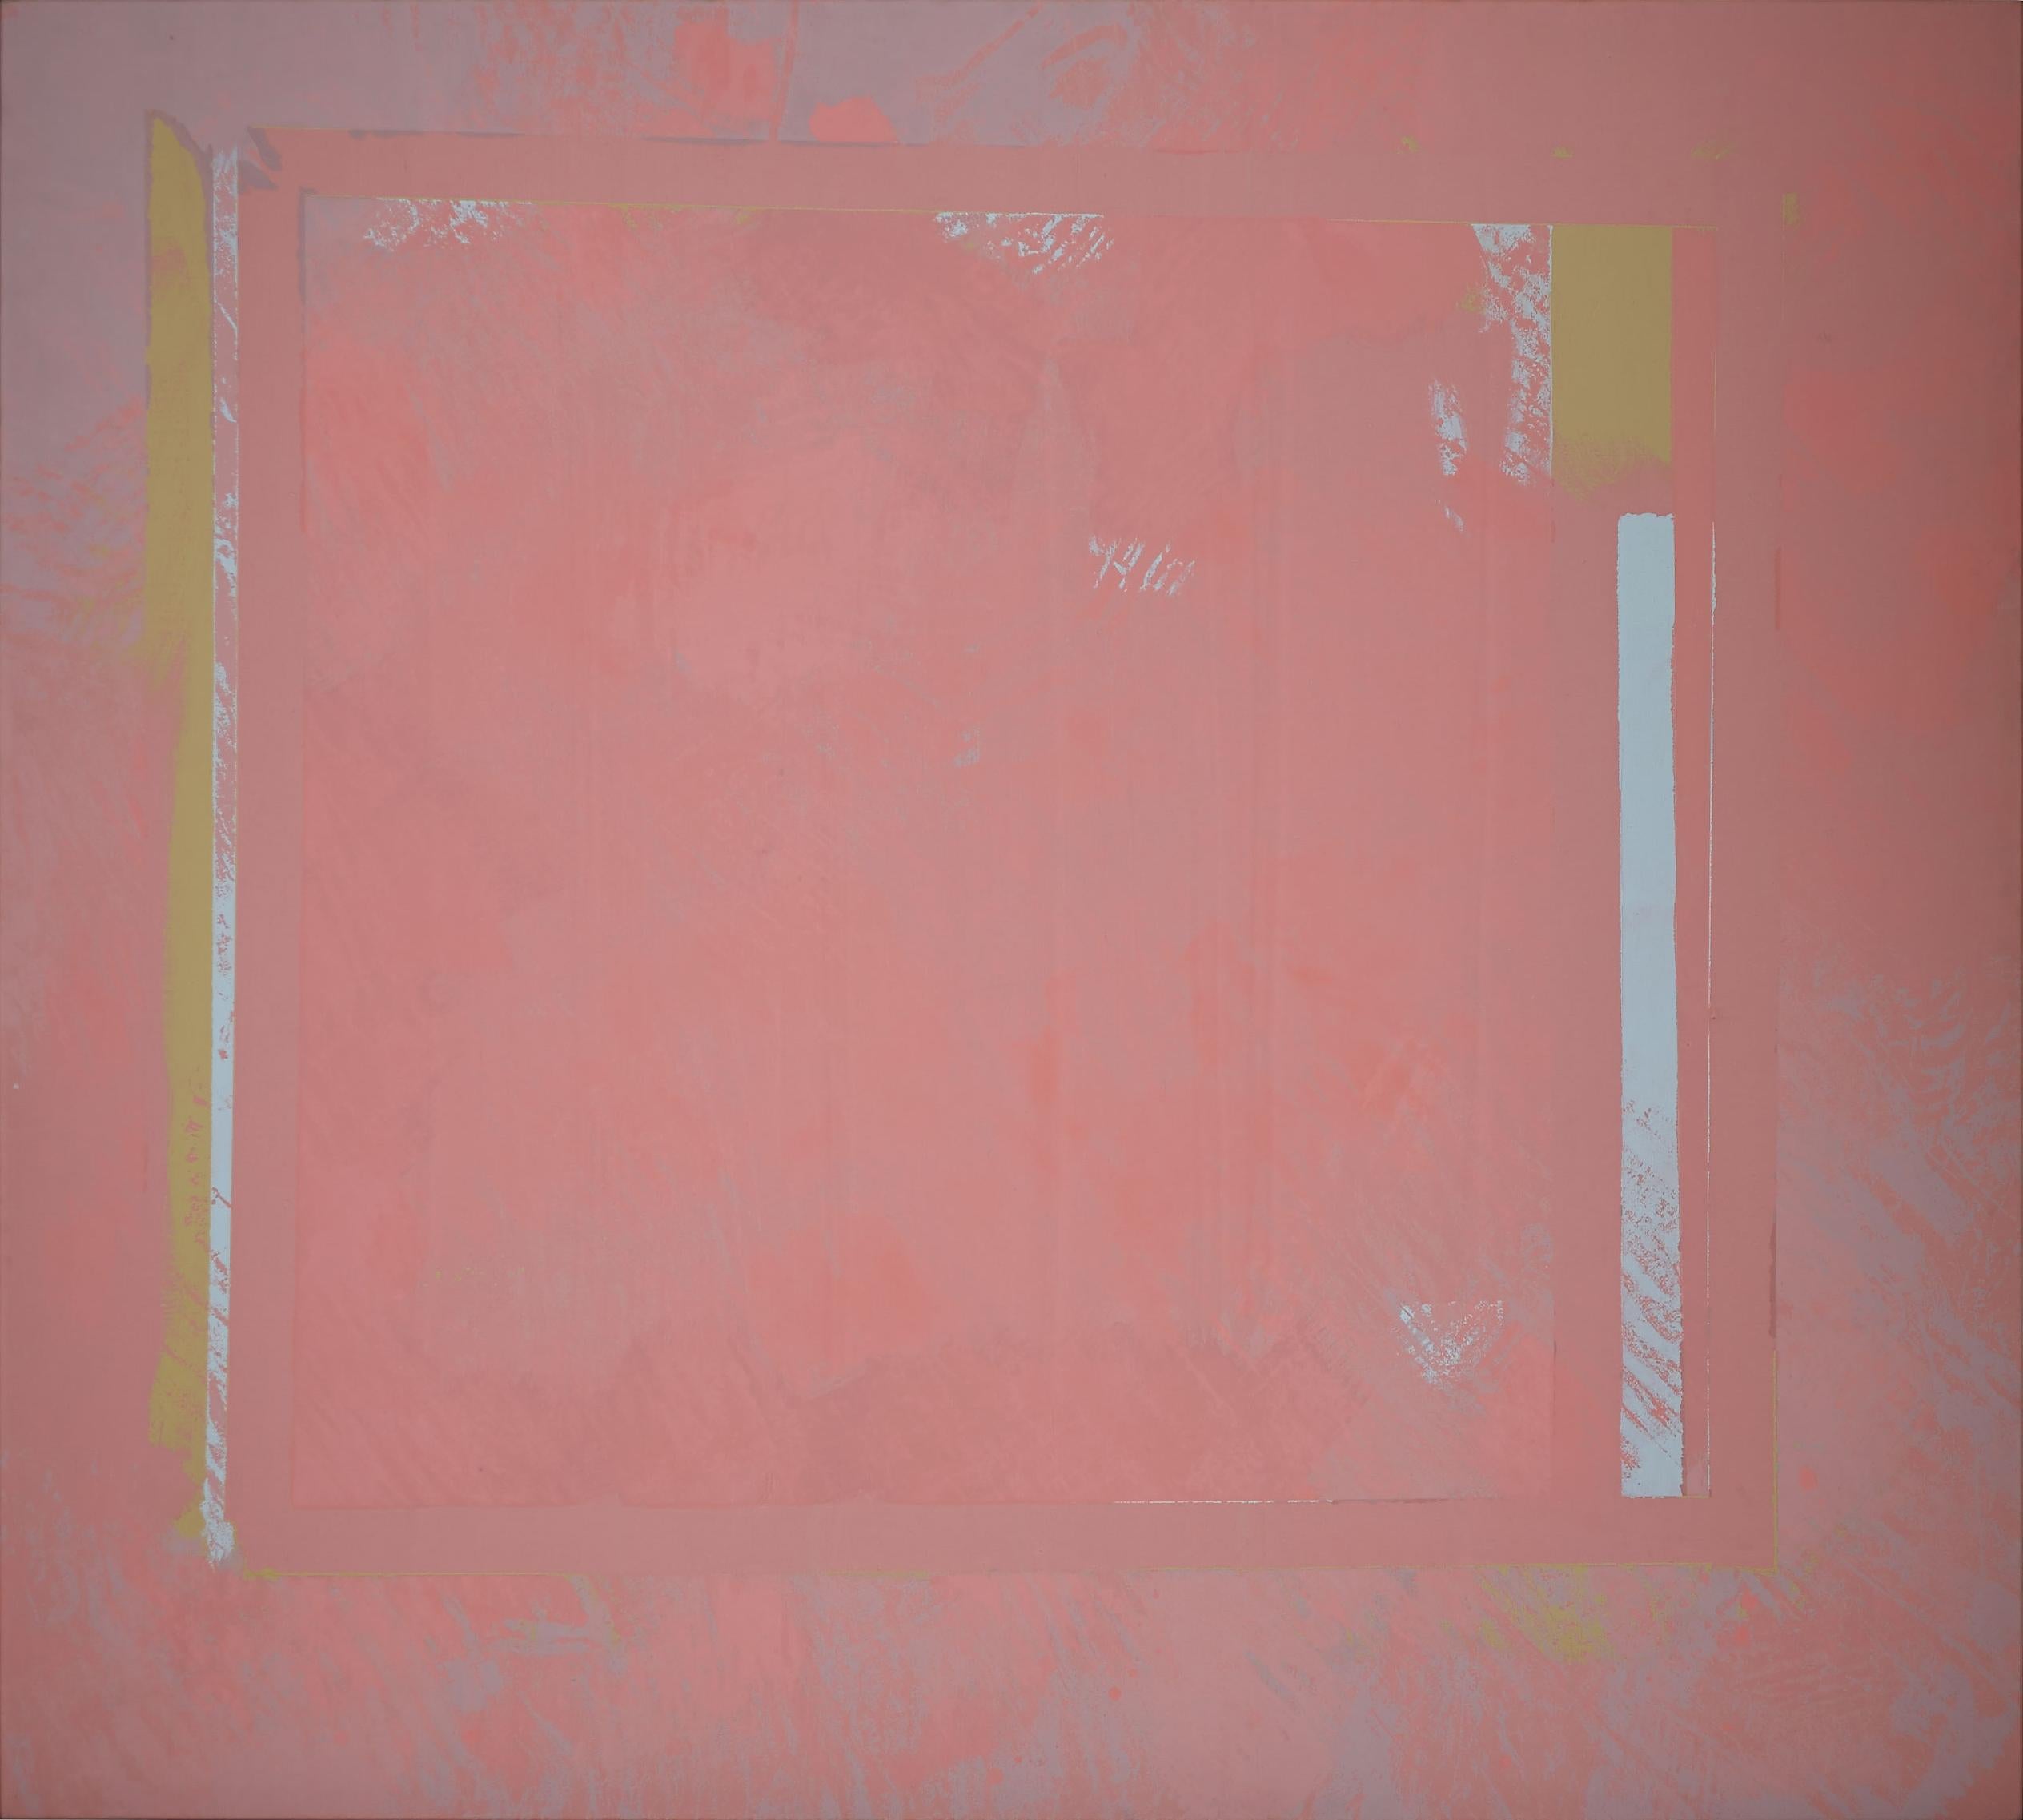 This horizontal oil painting by Walter Darby Bannard is an abstract work with large fields of pink color with highlights of yellow and white.  It is framed in a hand-made white lacquered frame with silver leaf. 

Walter Darby Bannard (American,